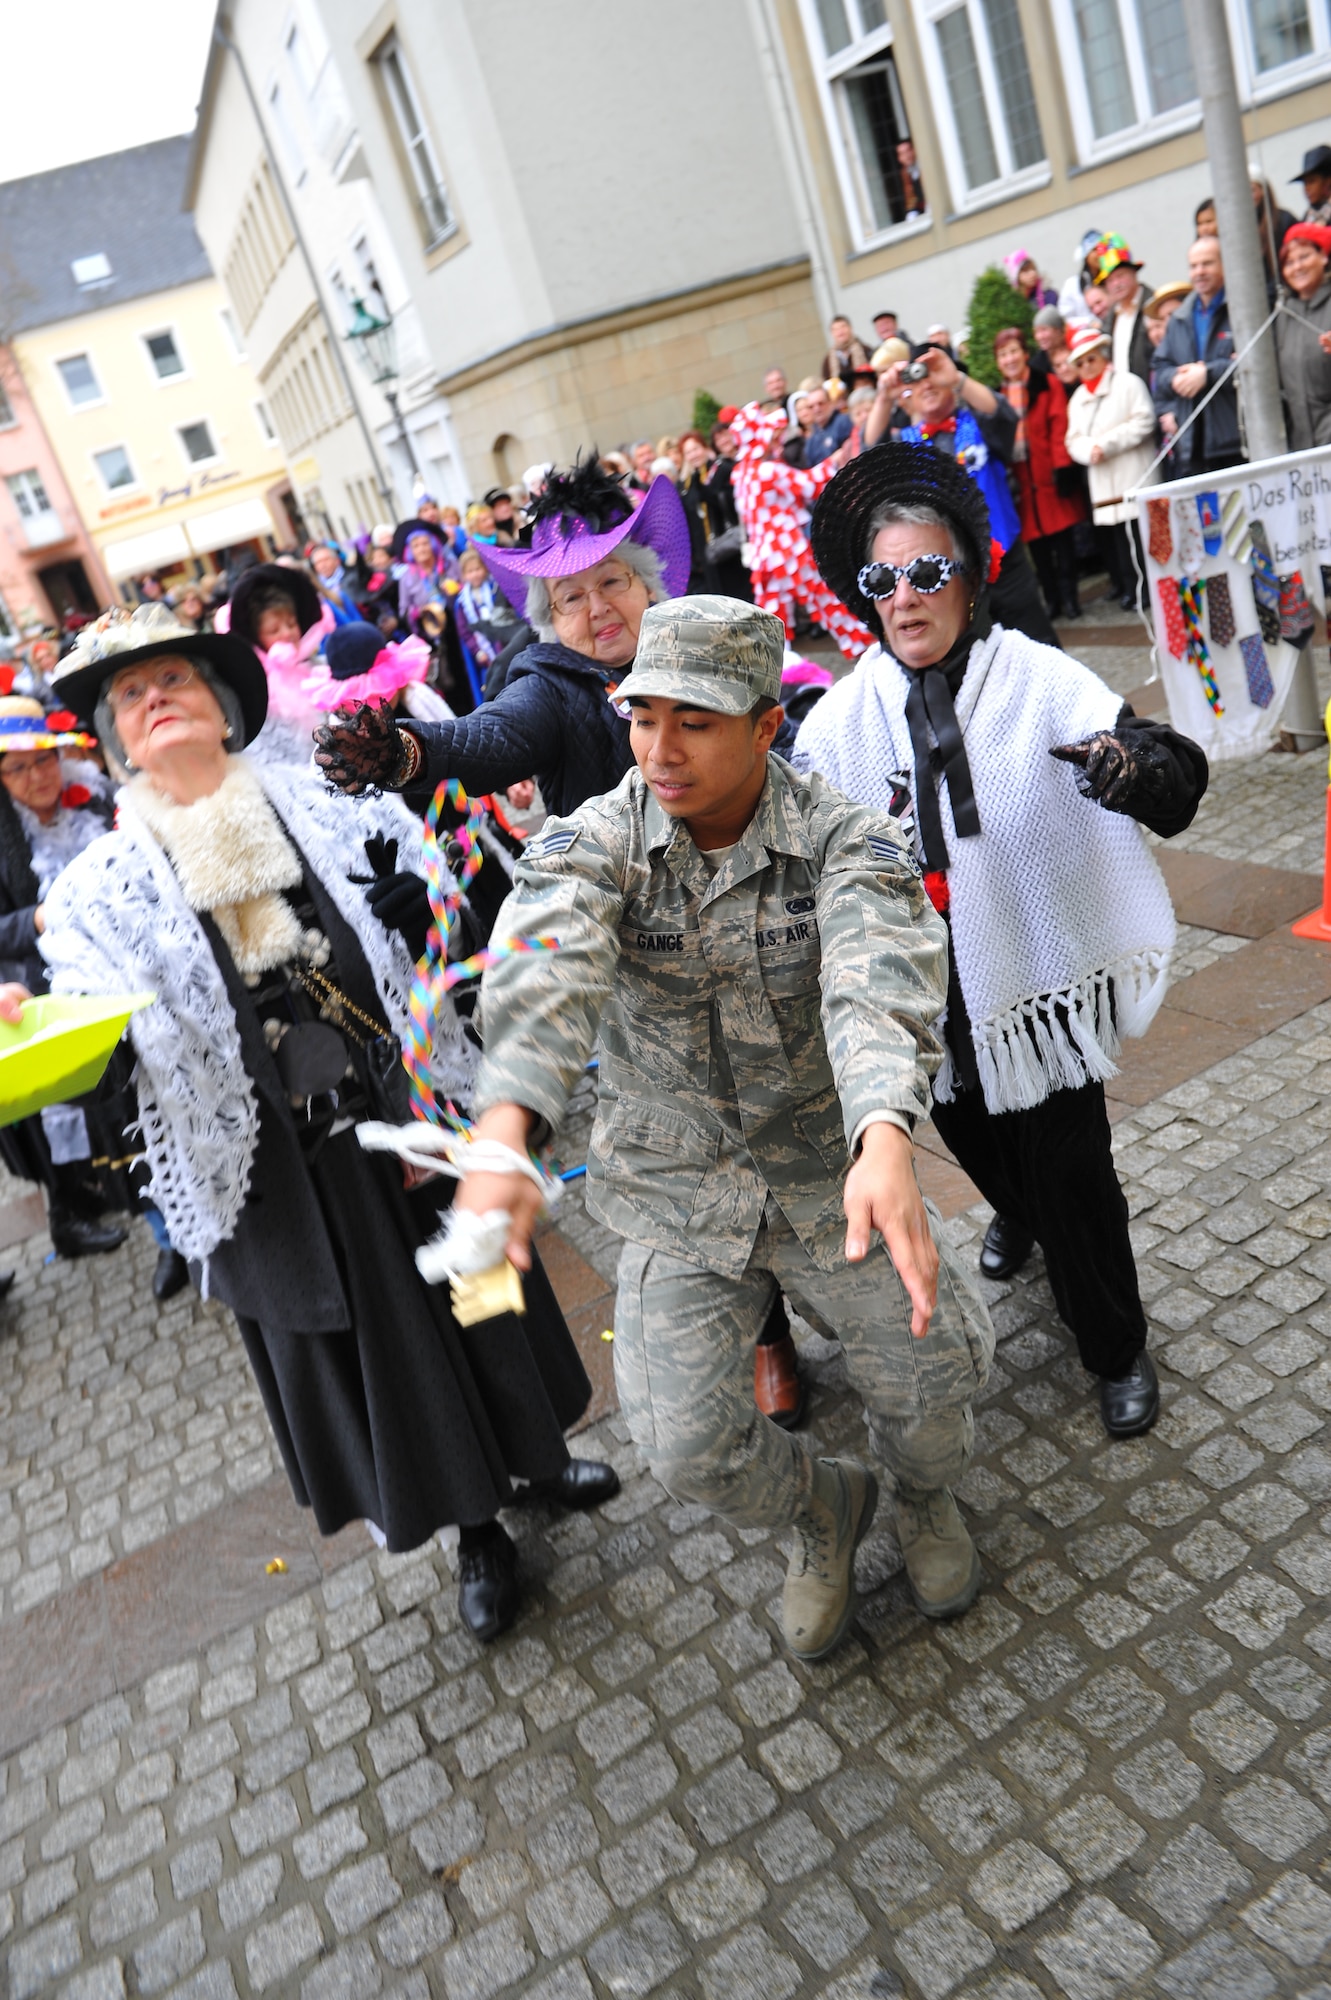 Senior Airman Urzus Gange, an engine supply technician from 52nd Logistics Readiness Squadron, runs through a street chased by female Bitburg citizens as part of a German tradition during a Fashing event at Bitburg, Germany, Feb. 16, 2012. During the German holiday tradition, the mayor of Bitburg invited a delegation from Spangdahlem Air Base to help him defend the city hall and its ceremonial key from the Fashing "fool ladies." (U.S. Air Force photo Airman 1st Class Dillon Davis / Released) 